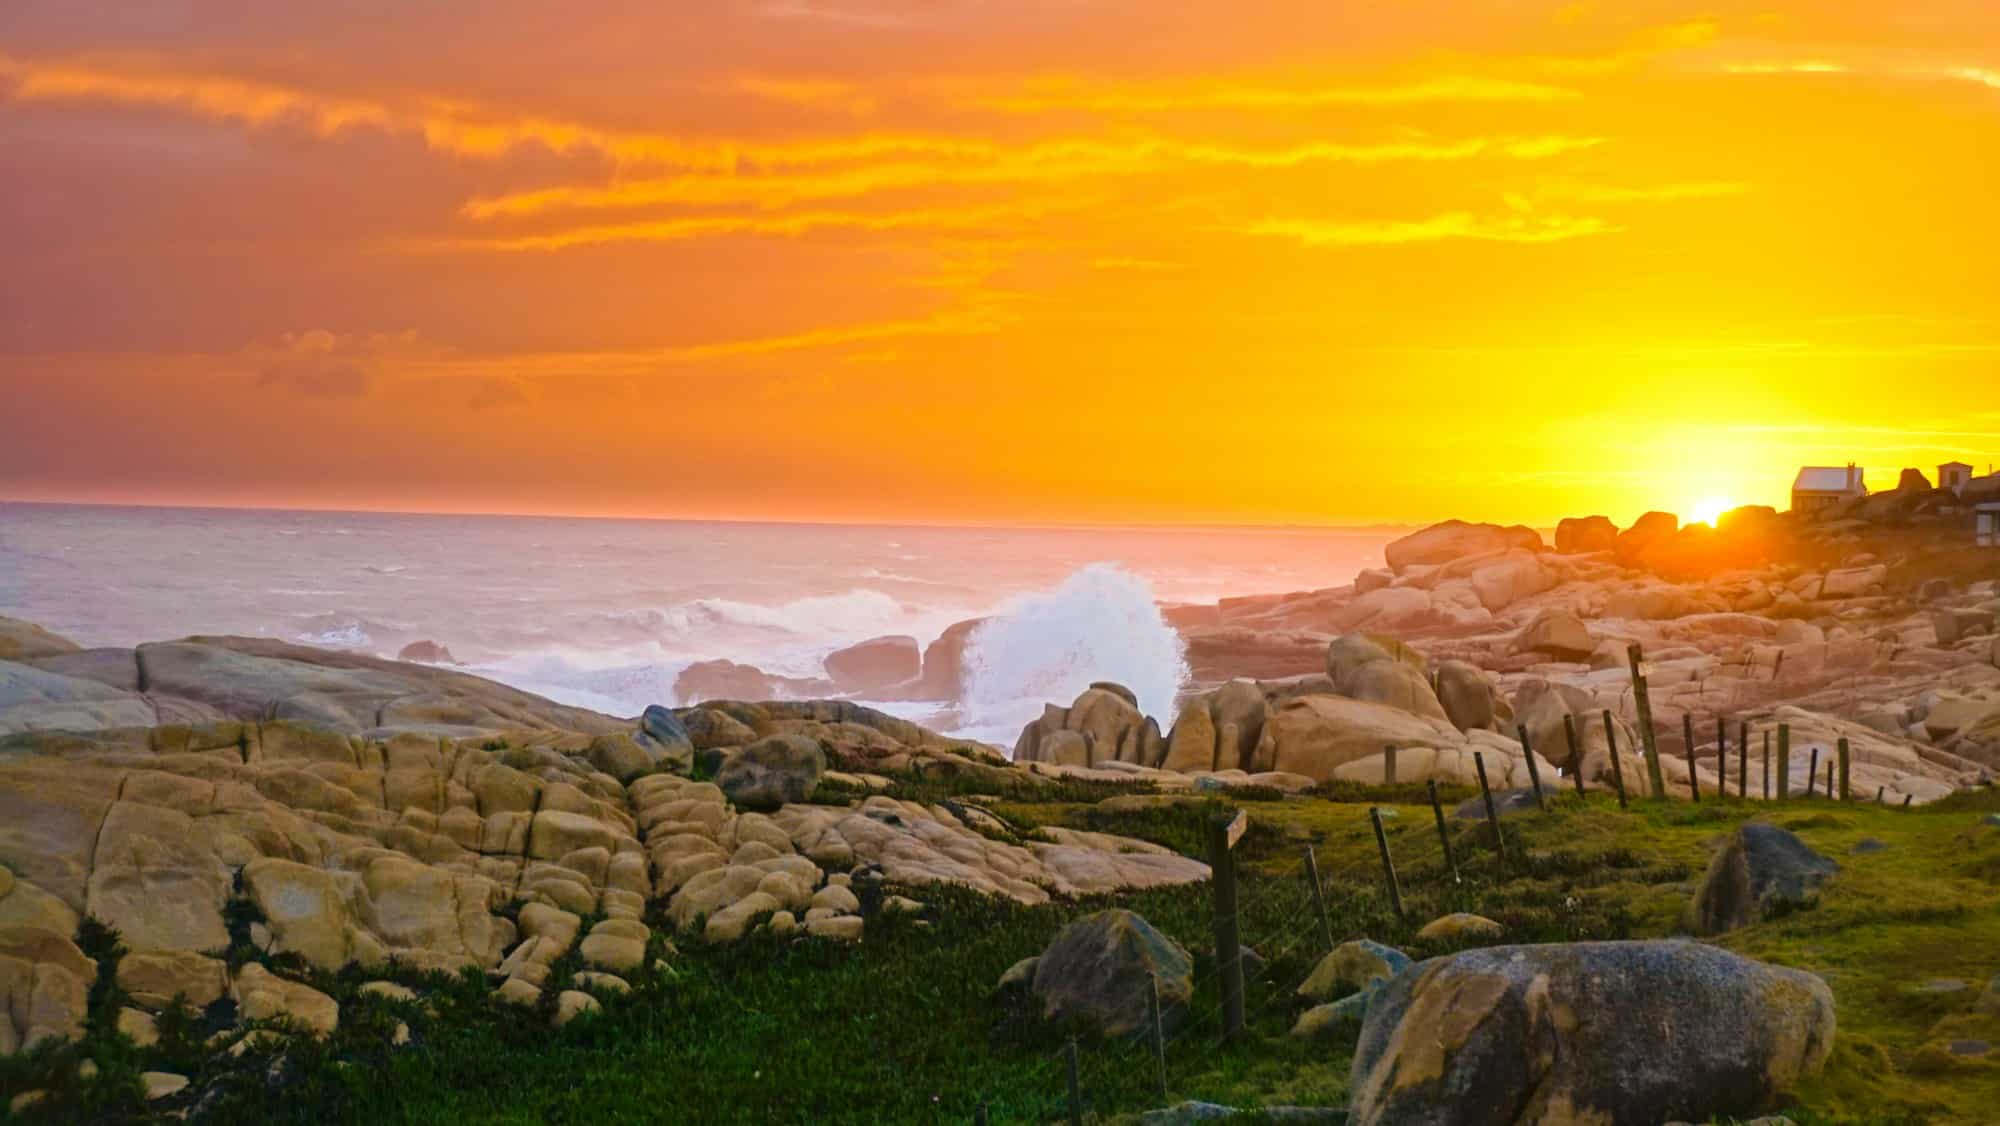 Breathtaking shot of beautiful and scenic sunset at Cabo Polonio